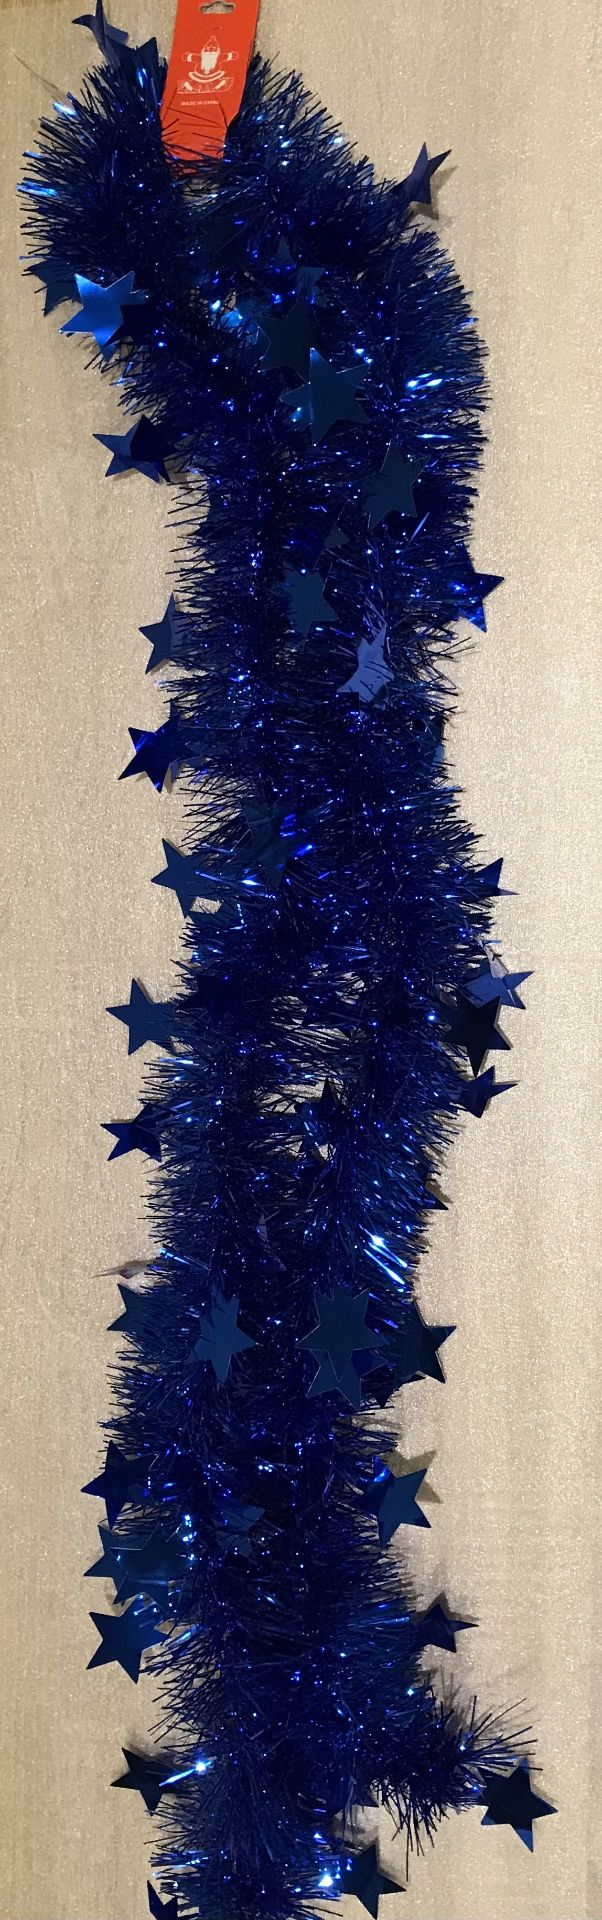 500 X Tinsel With Stars 1.8M Long 5 Colours Gold, Silver, Red, Blue, Green - Image 4 of 6